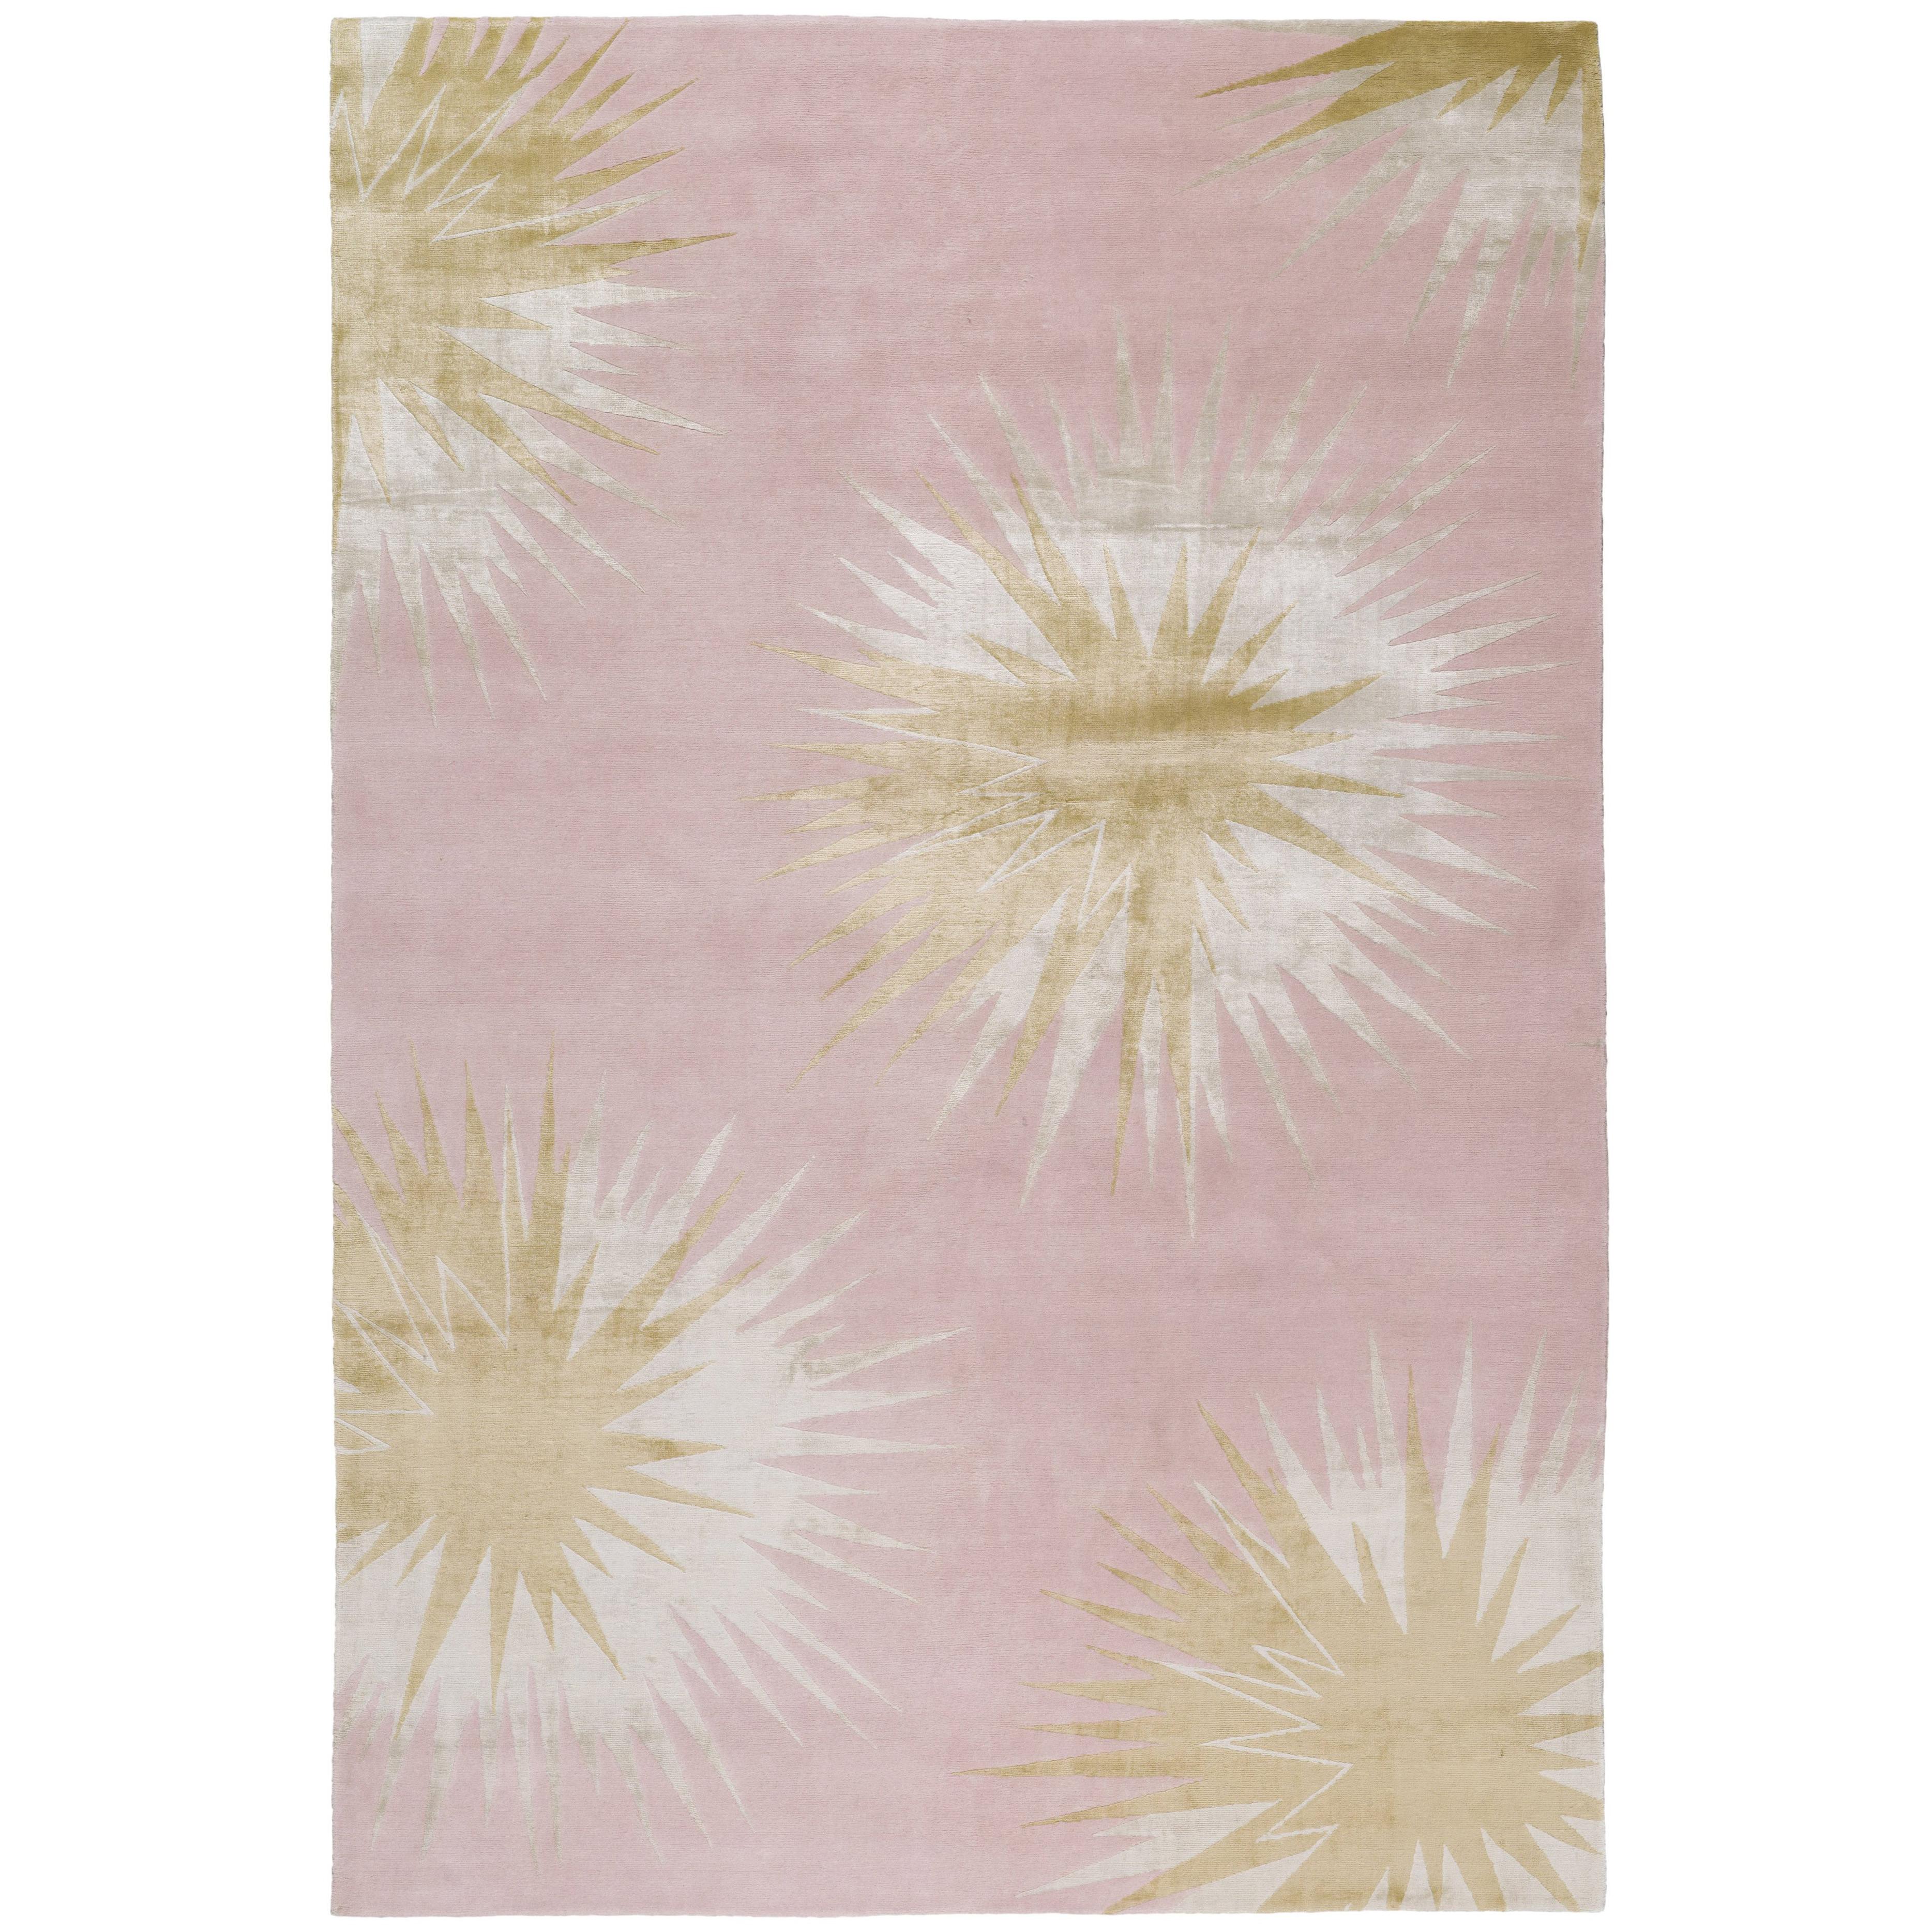 Thistle Gold Hand-Knotted 6x4 Rug in Wool and Silk by Vivienne Westwood